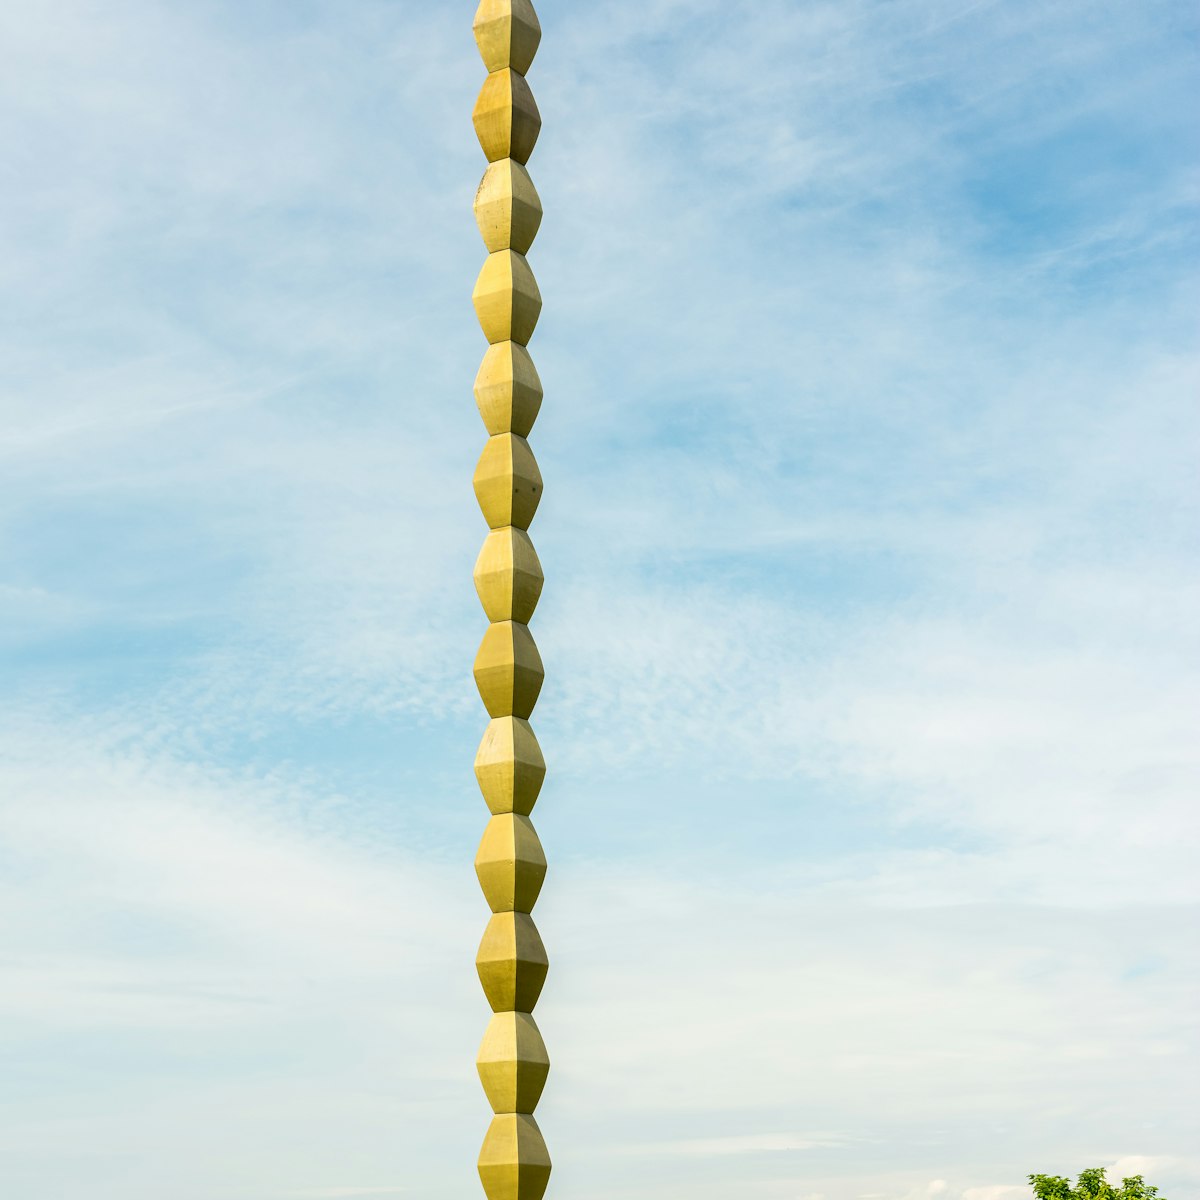 The Endless Column (Column of Infinite) made by Constantin Brancusi in Targu Jiu, Romania symbolizes the Infinite Sacrifice of Romanian soldiers and it is considered the top point of the modern Art.; Shutterstock ID 242715793; purchase_order: 65050; job: ; client: ; other:
242715793